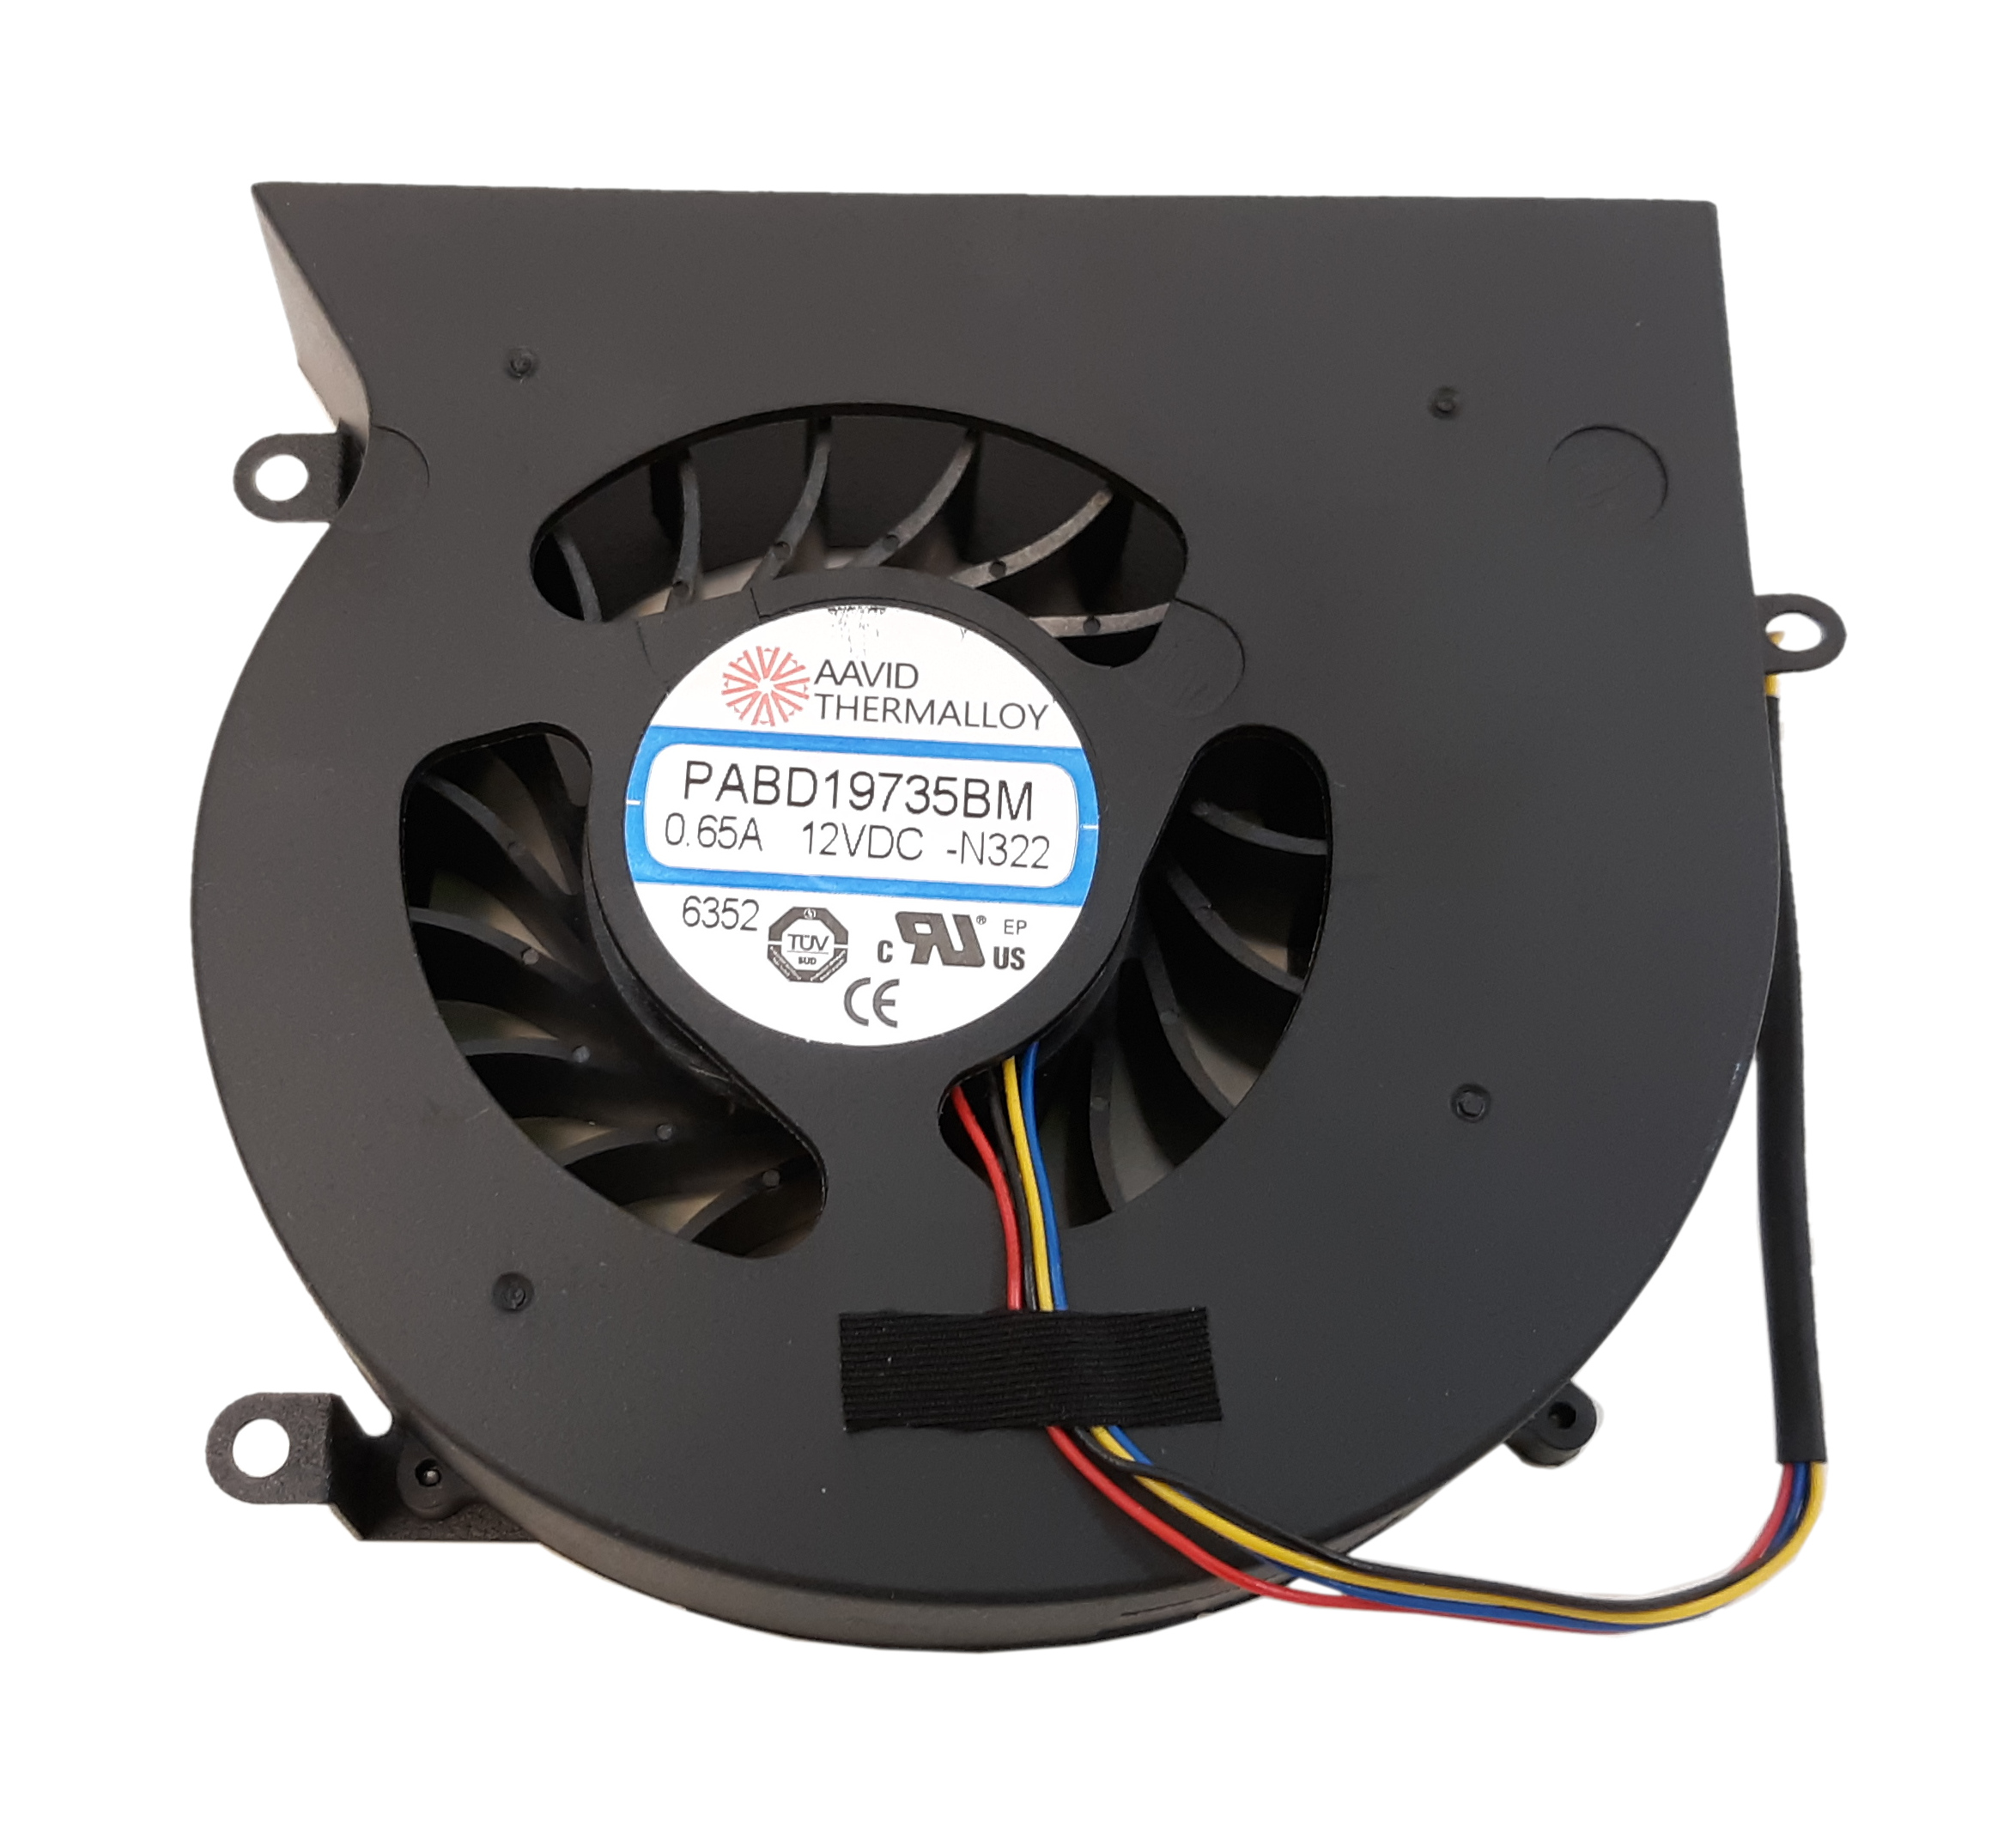 Aavid Thermalloy Laptop CPU Cooling Fan 4 Pin For MSI 0.65A 12VDC PABD19735BM N322